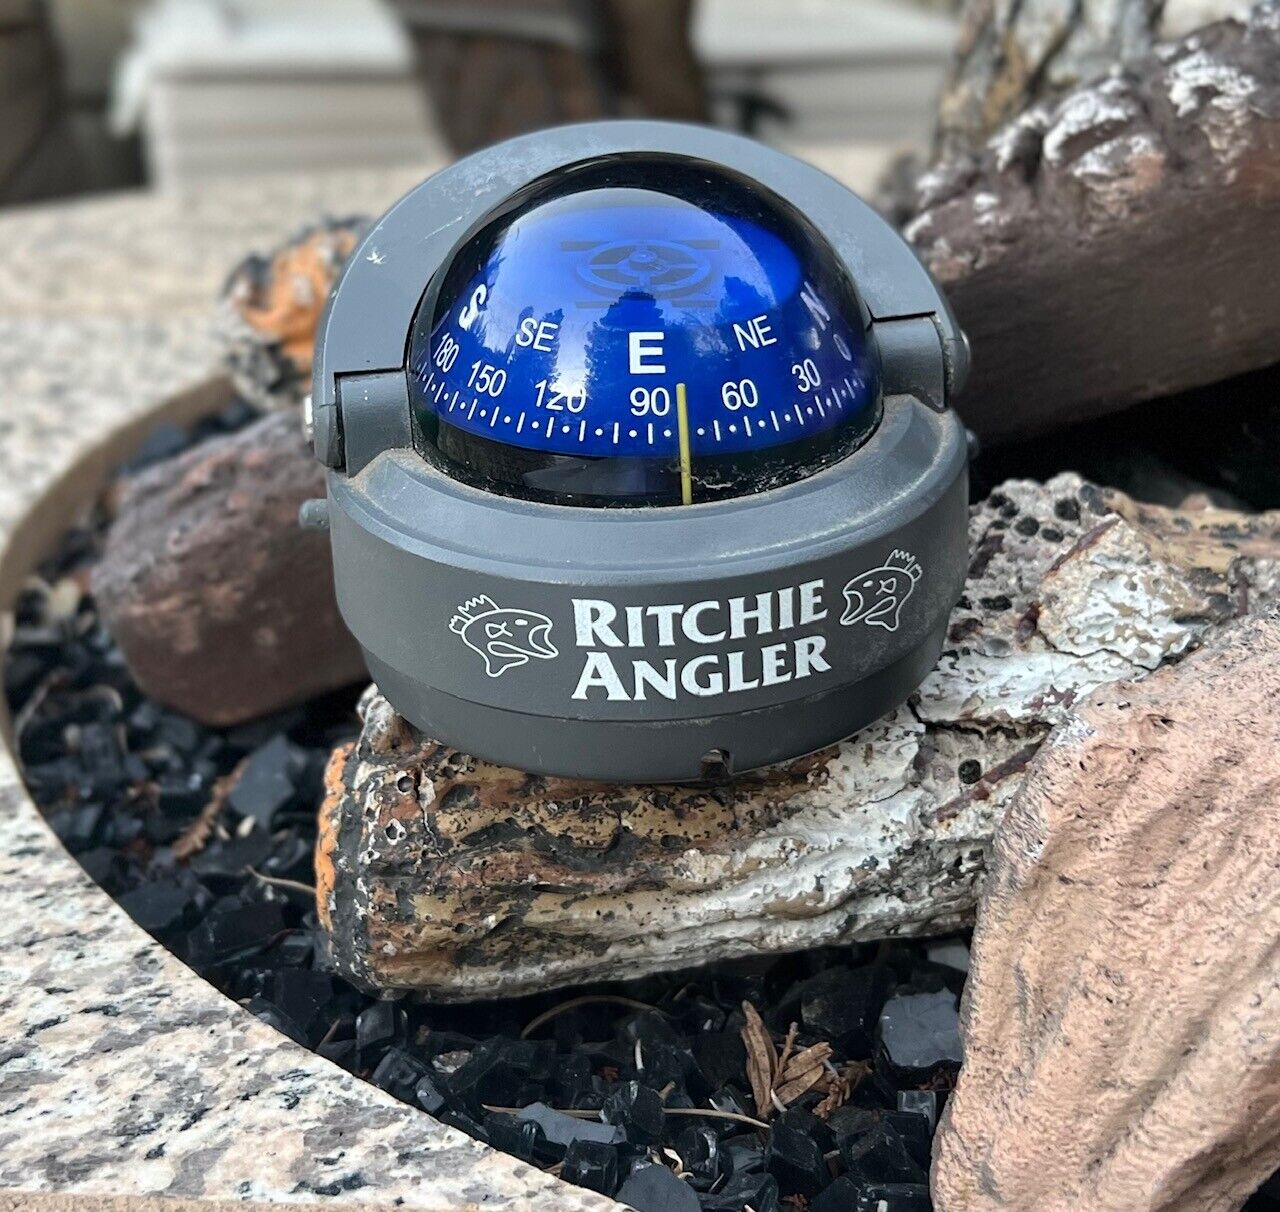 RitchieAngler Surface Mount (RA-93) Boat Compass Richie